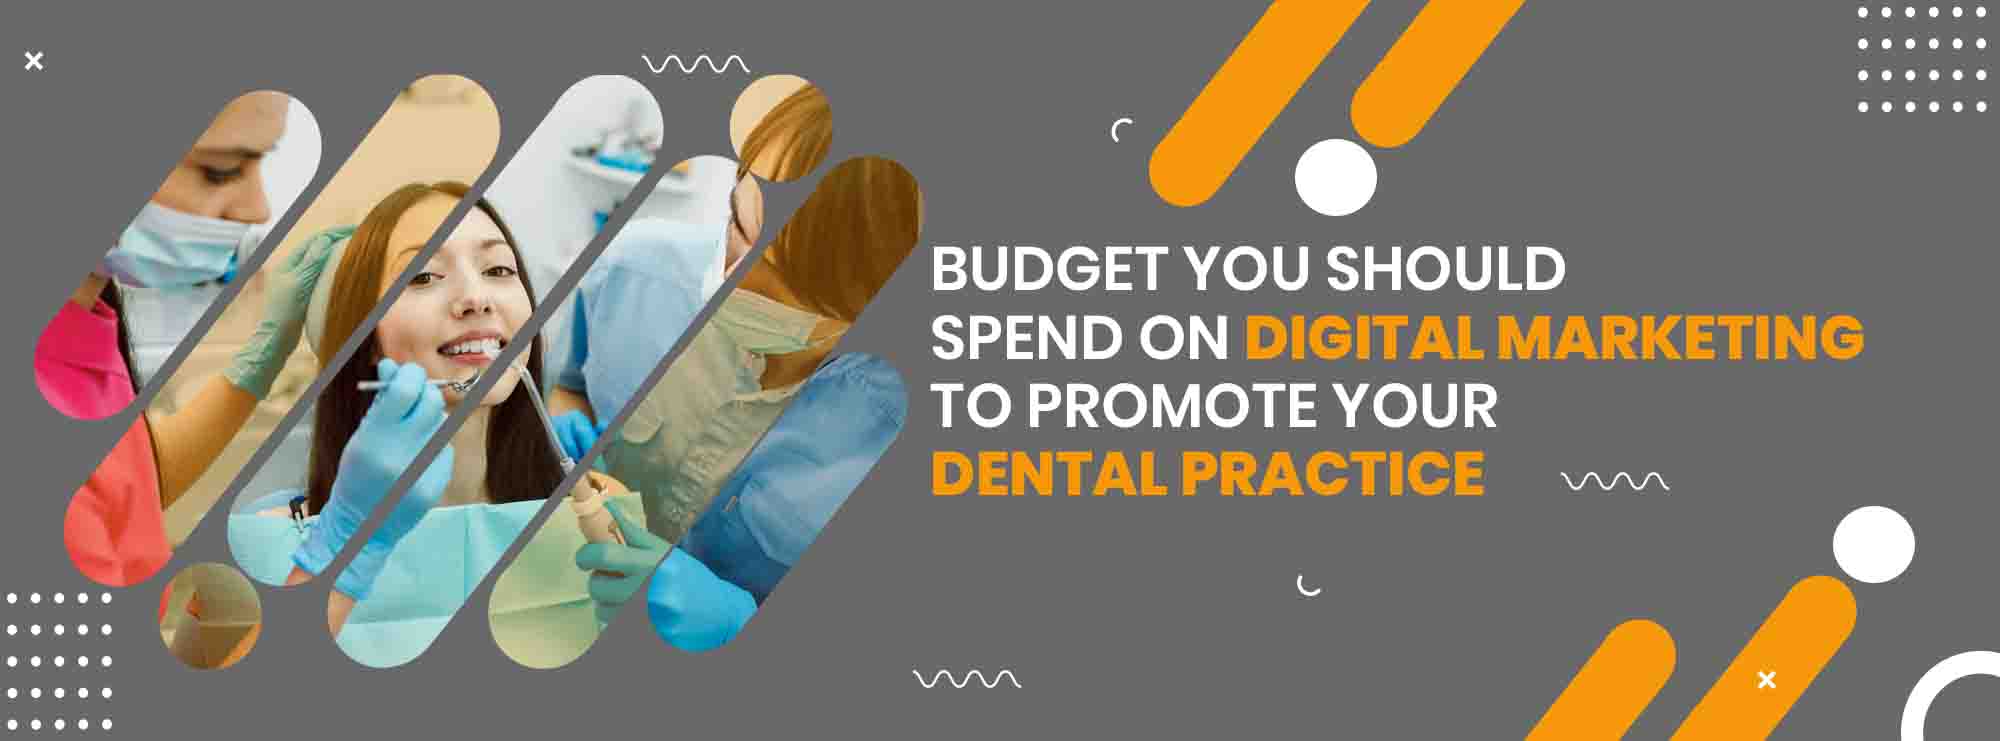 budget-you-should-spend-on-digital-marketing-to-promote-your-dental-practice